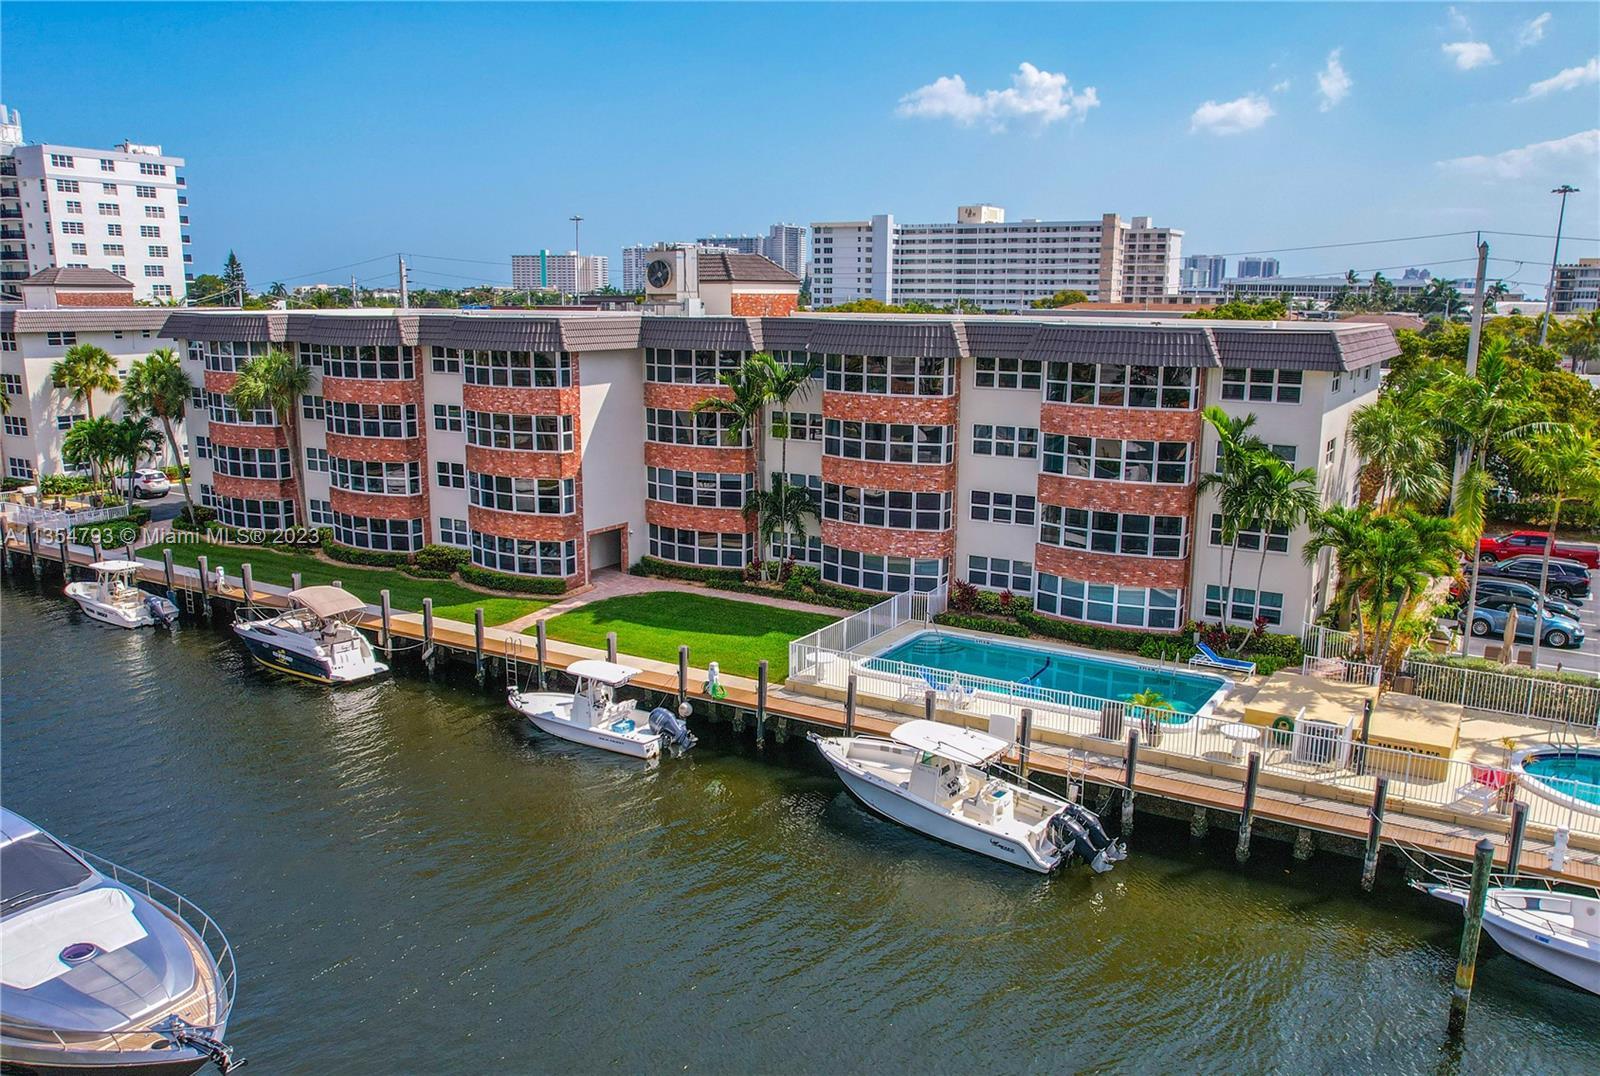 Live where you vacation & enjoy the spectacular water views this condo has to offer! Soak in all the